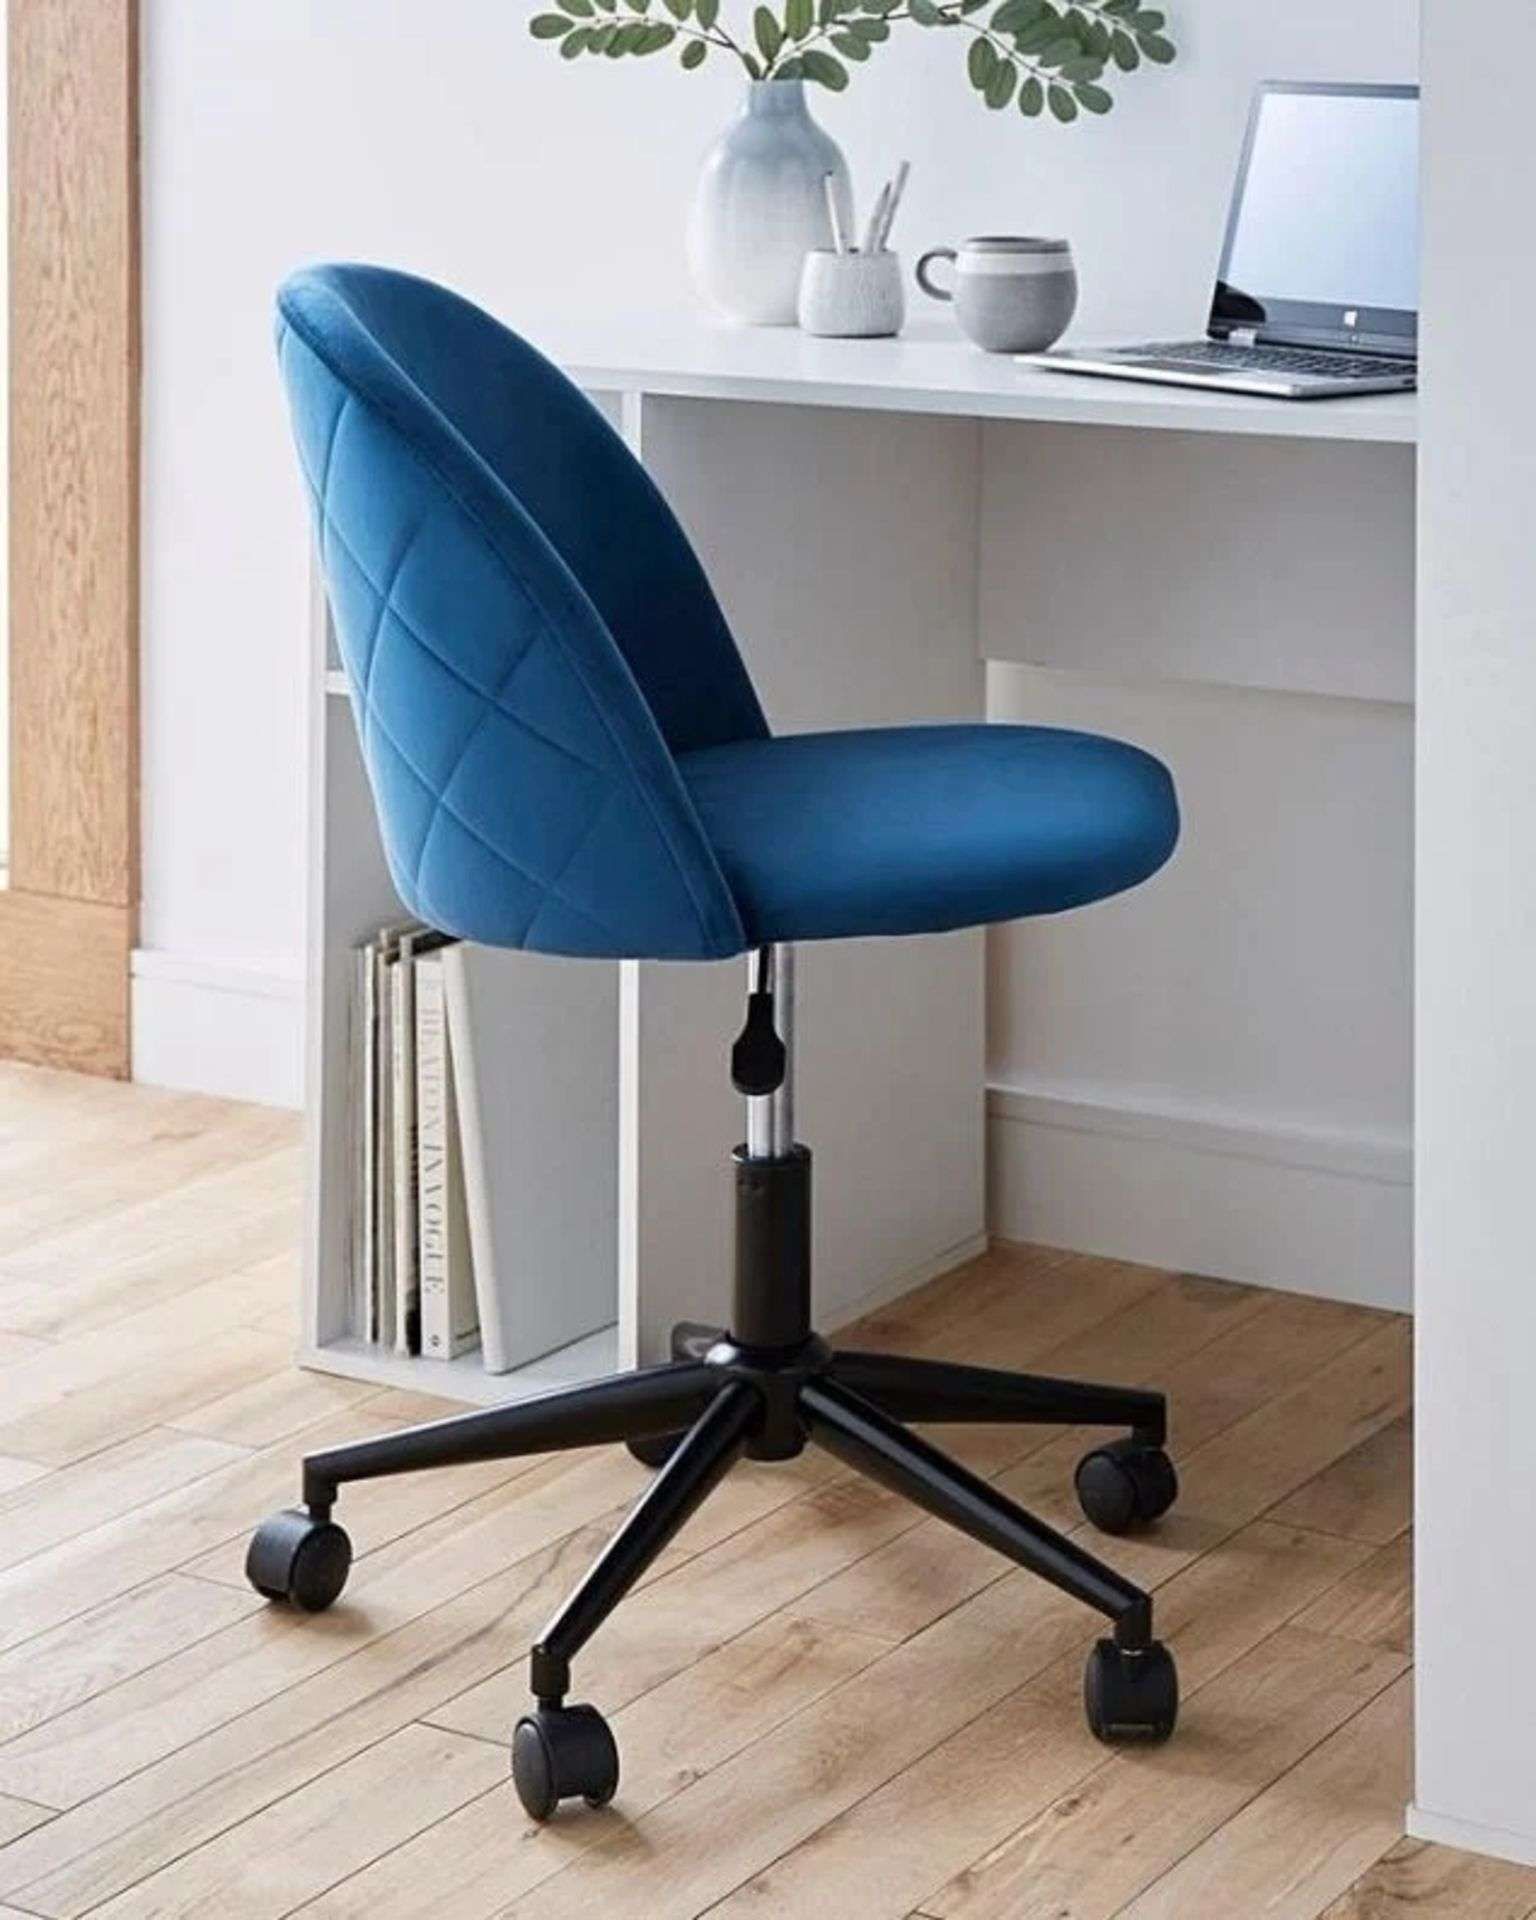 Brand New & Boxed Klara Office Chair - Navy. RRP £199 each. The Klara Office Chair is a luxurious